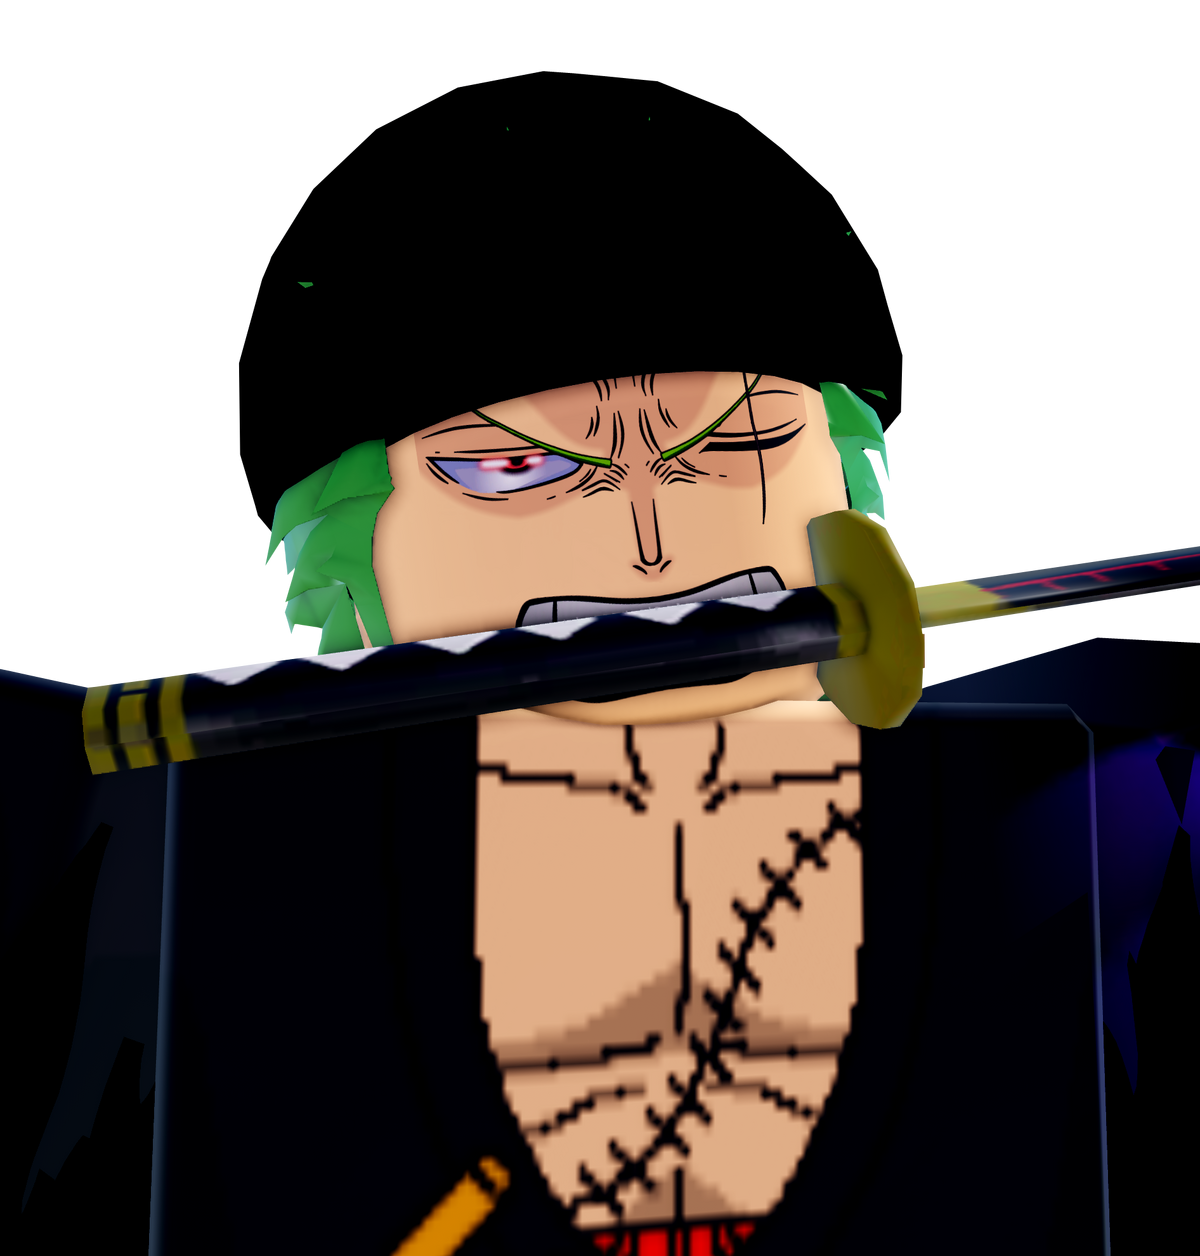 he was not there before #astd #roblox#towerdefense#anime